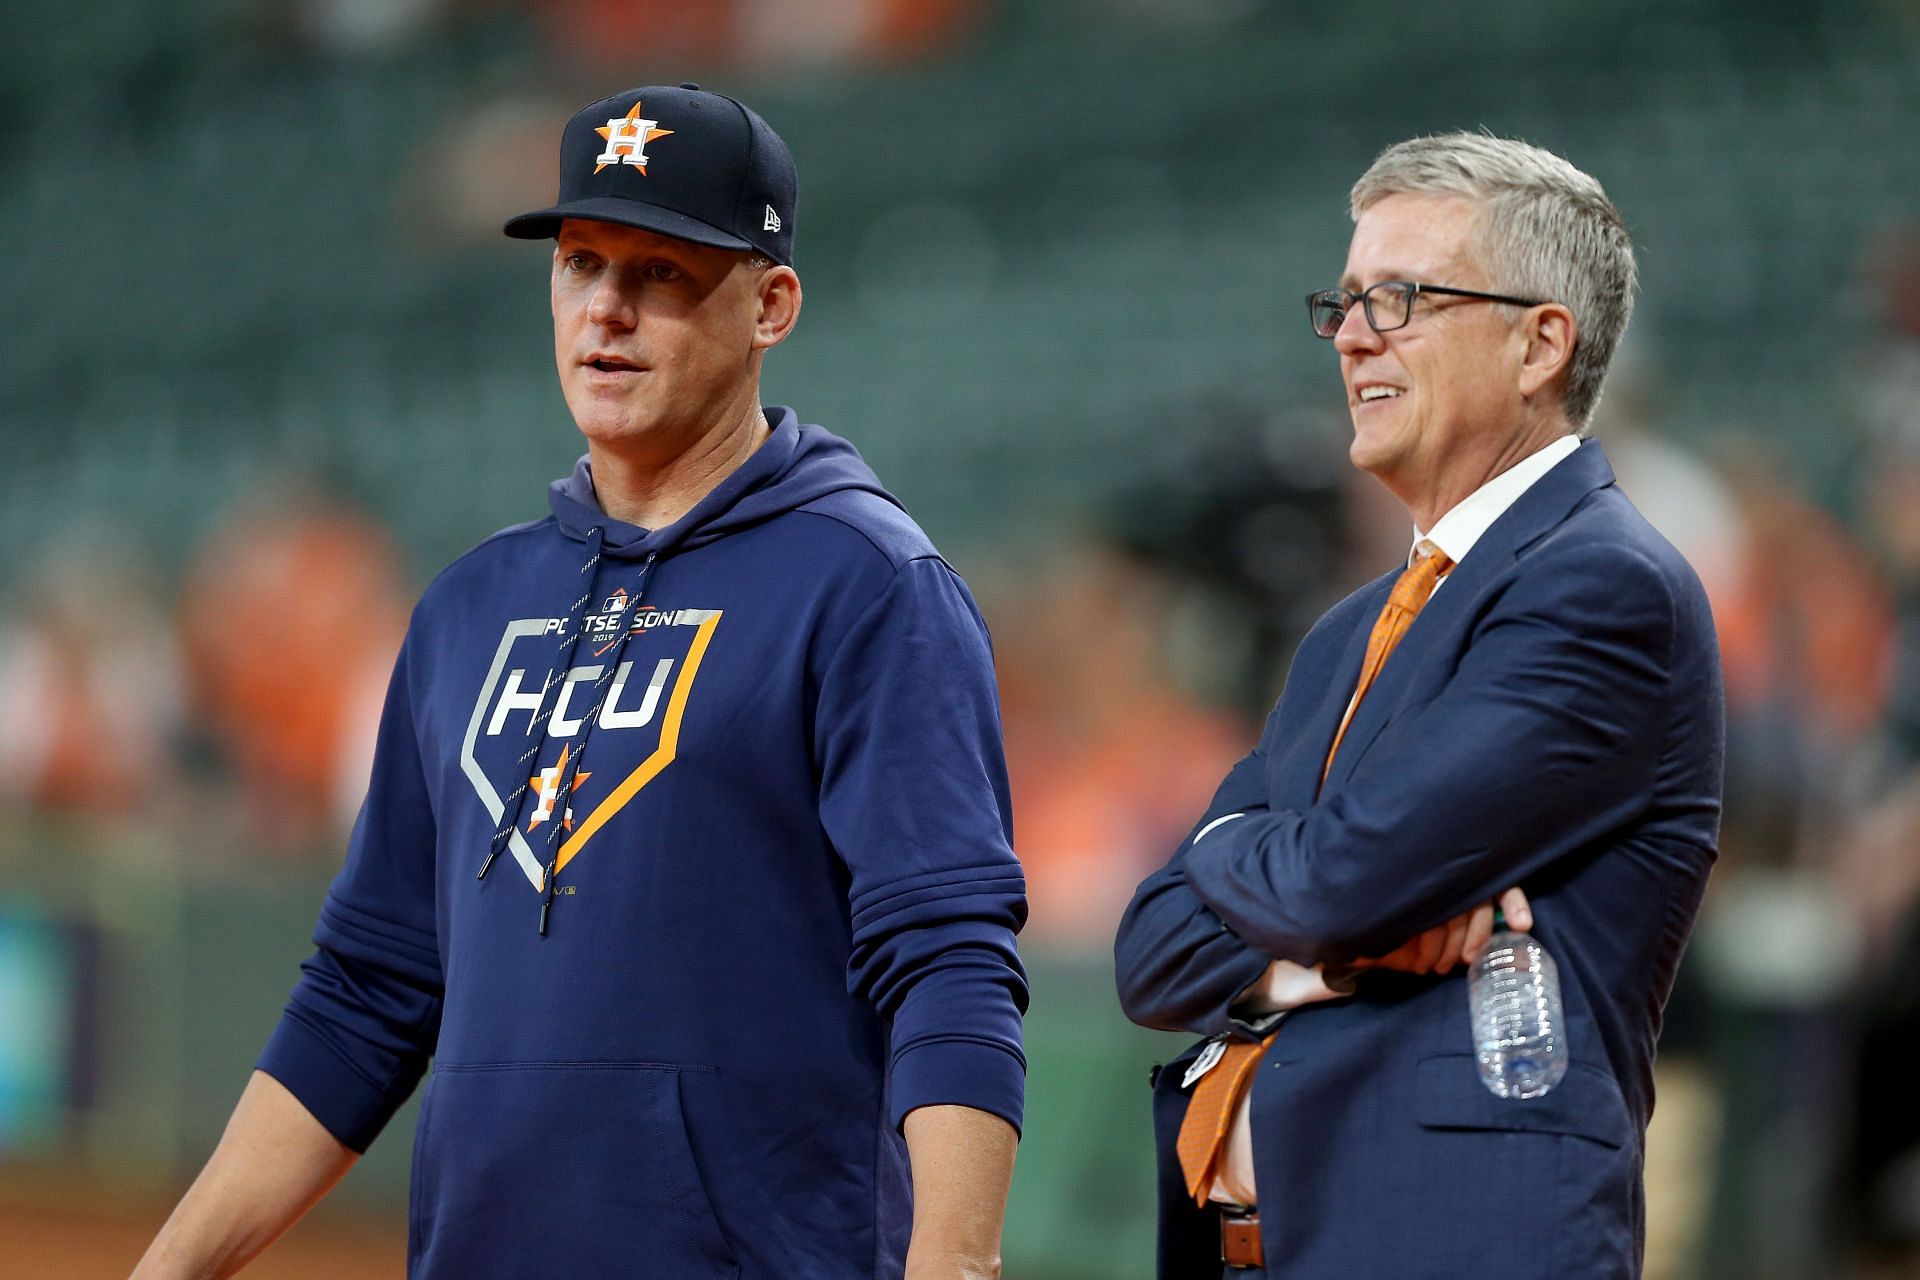 Former Astros manager AJ Hinch hired by Detroit Tigers following